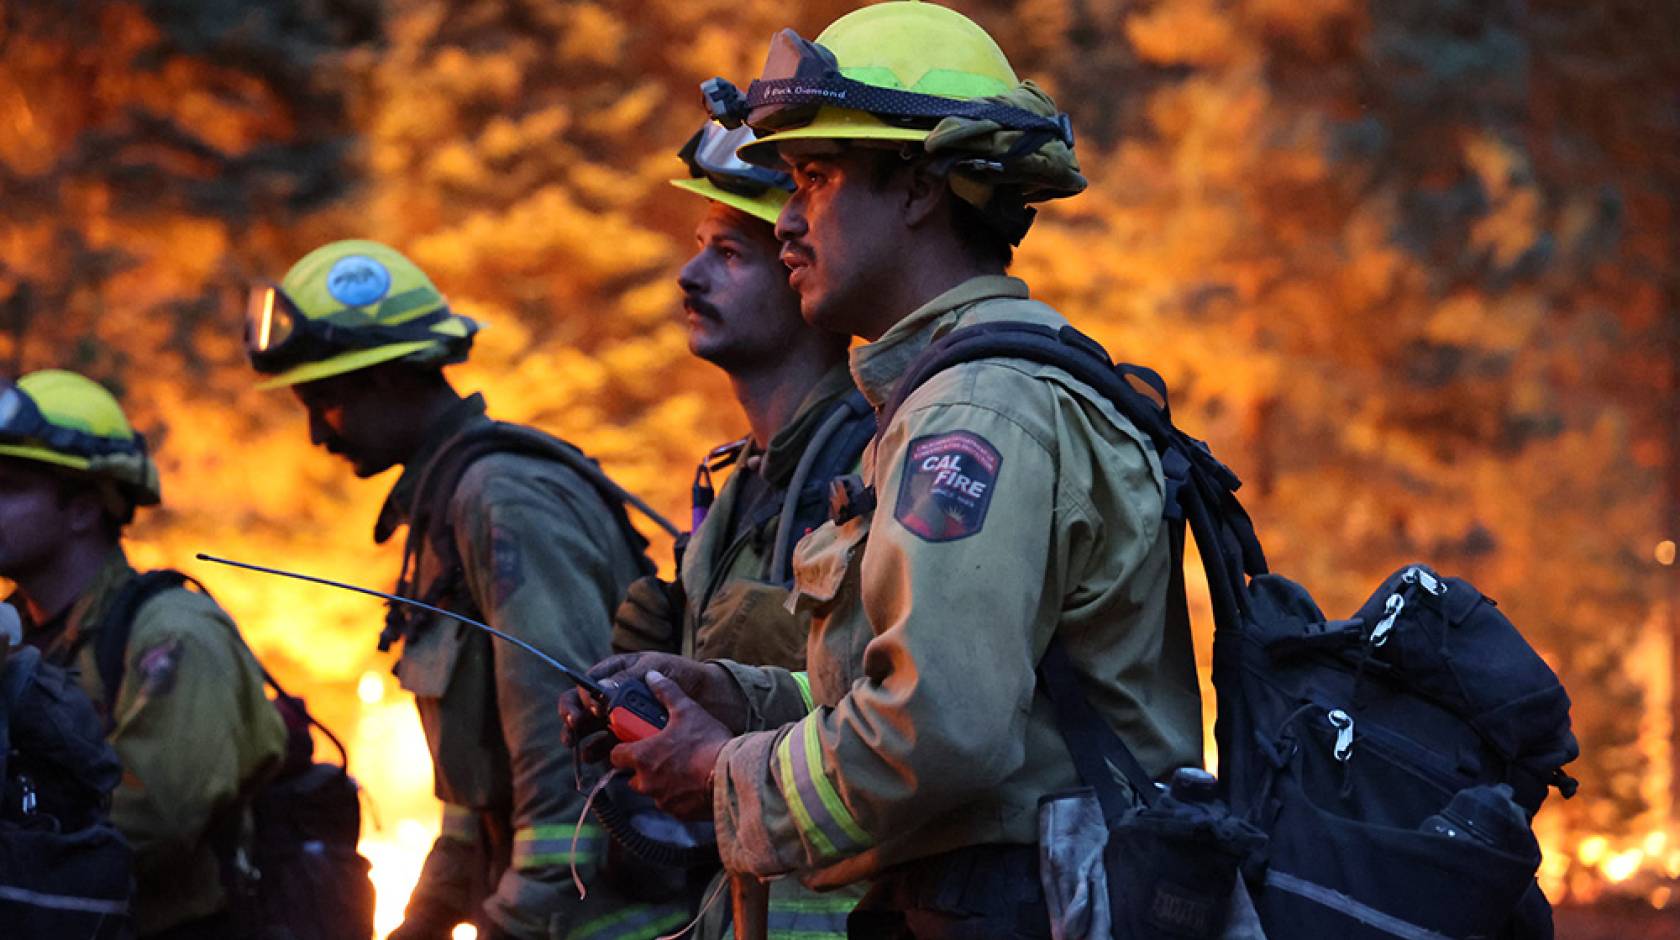 Four firefighters stand against a backdrop of flames. The scene is dark, and 2 young male firefighters hold a device with a long antenna